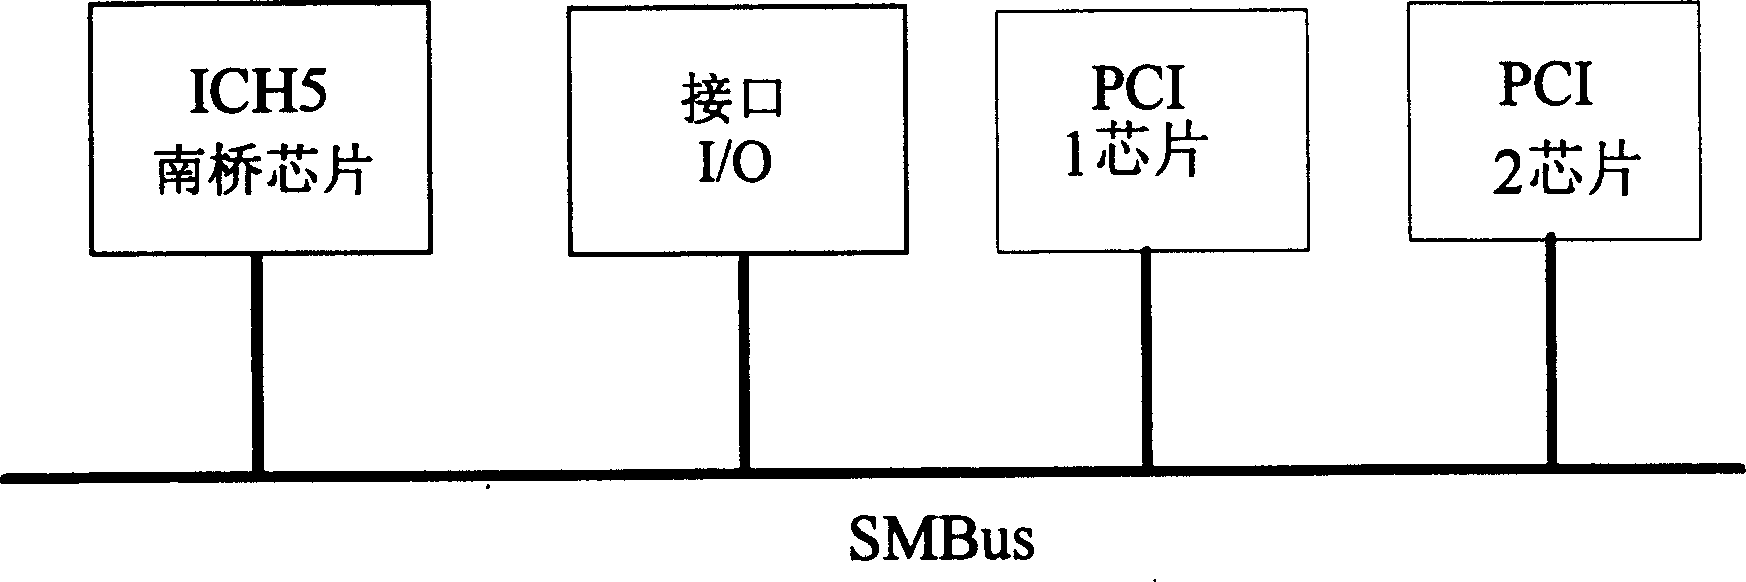 Method for monitoring device by SMBus chip on PCI plate and its device